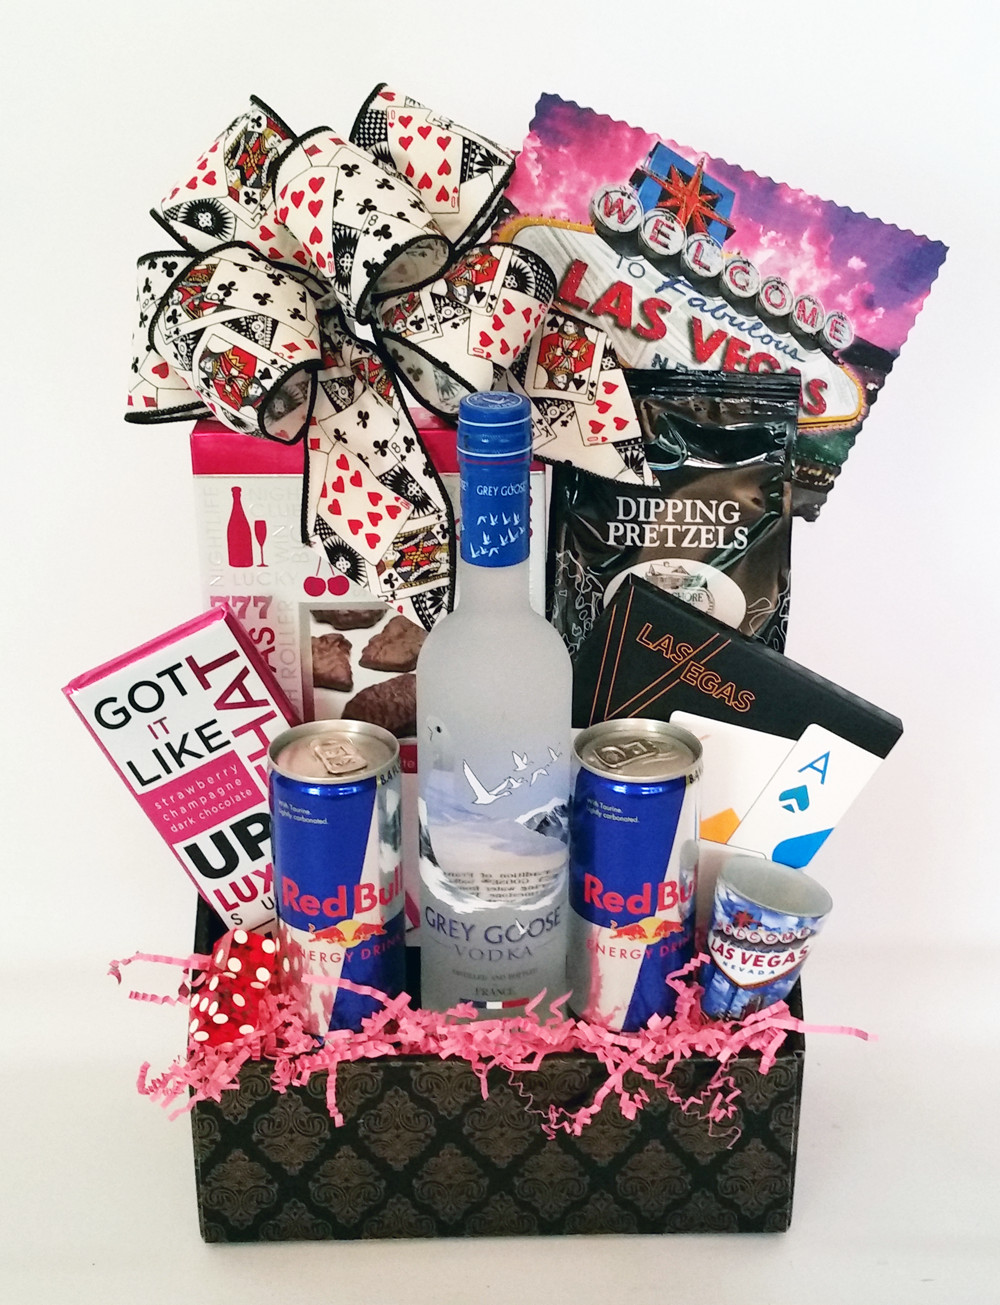 Ladies Night Out Gift Basket Ideas
 Girls Night Out Party Weekend Las Vegas Style Gift Basket